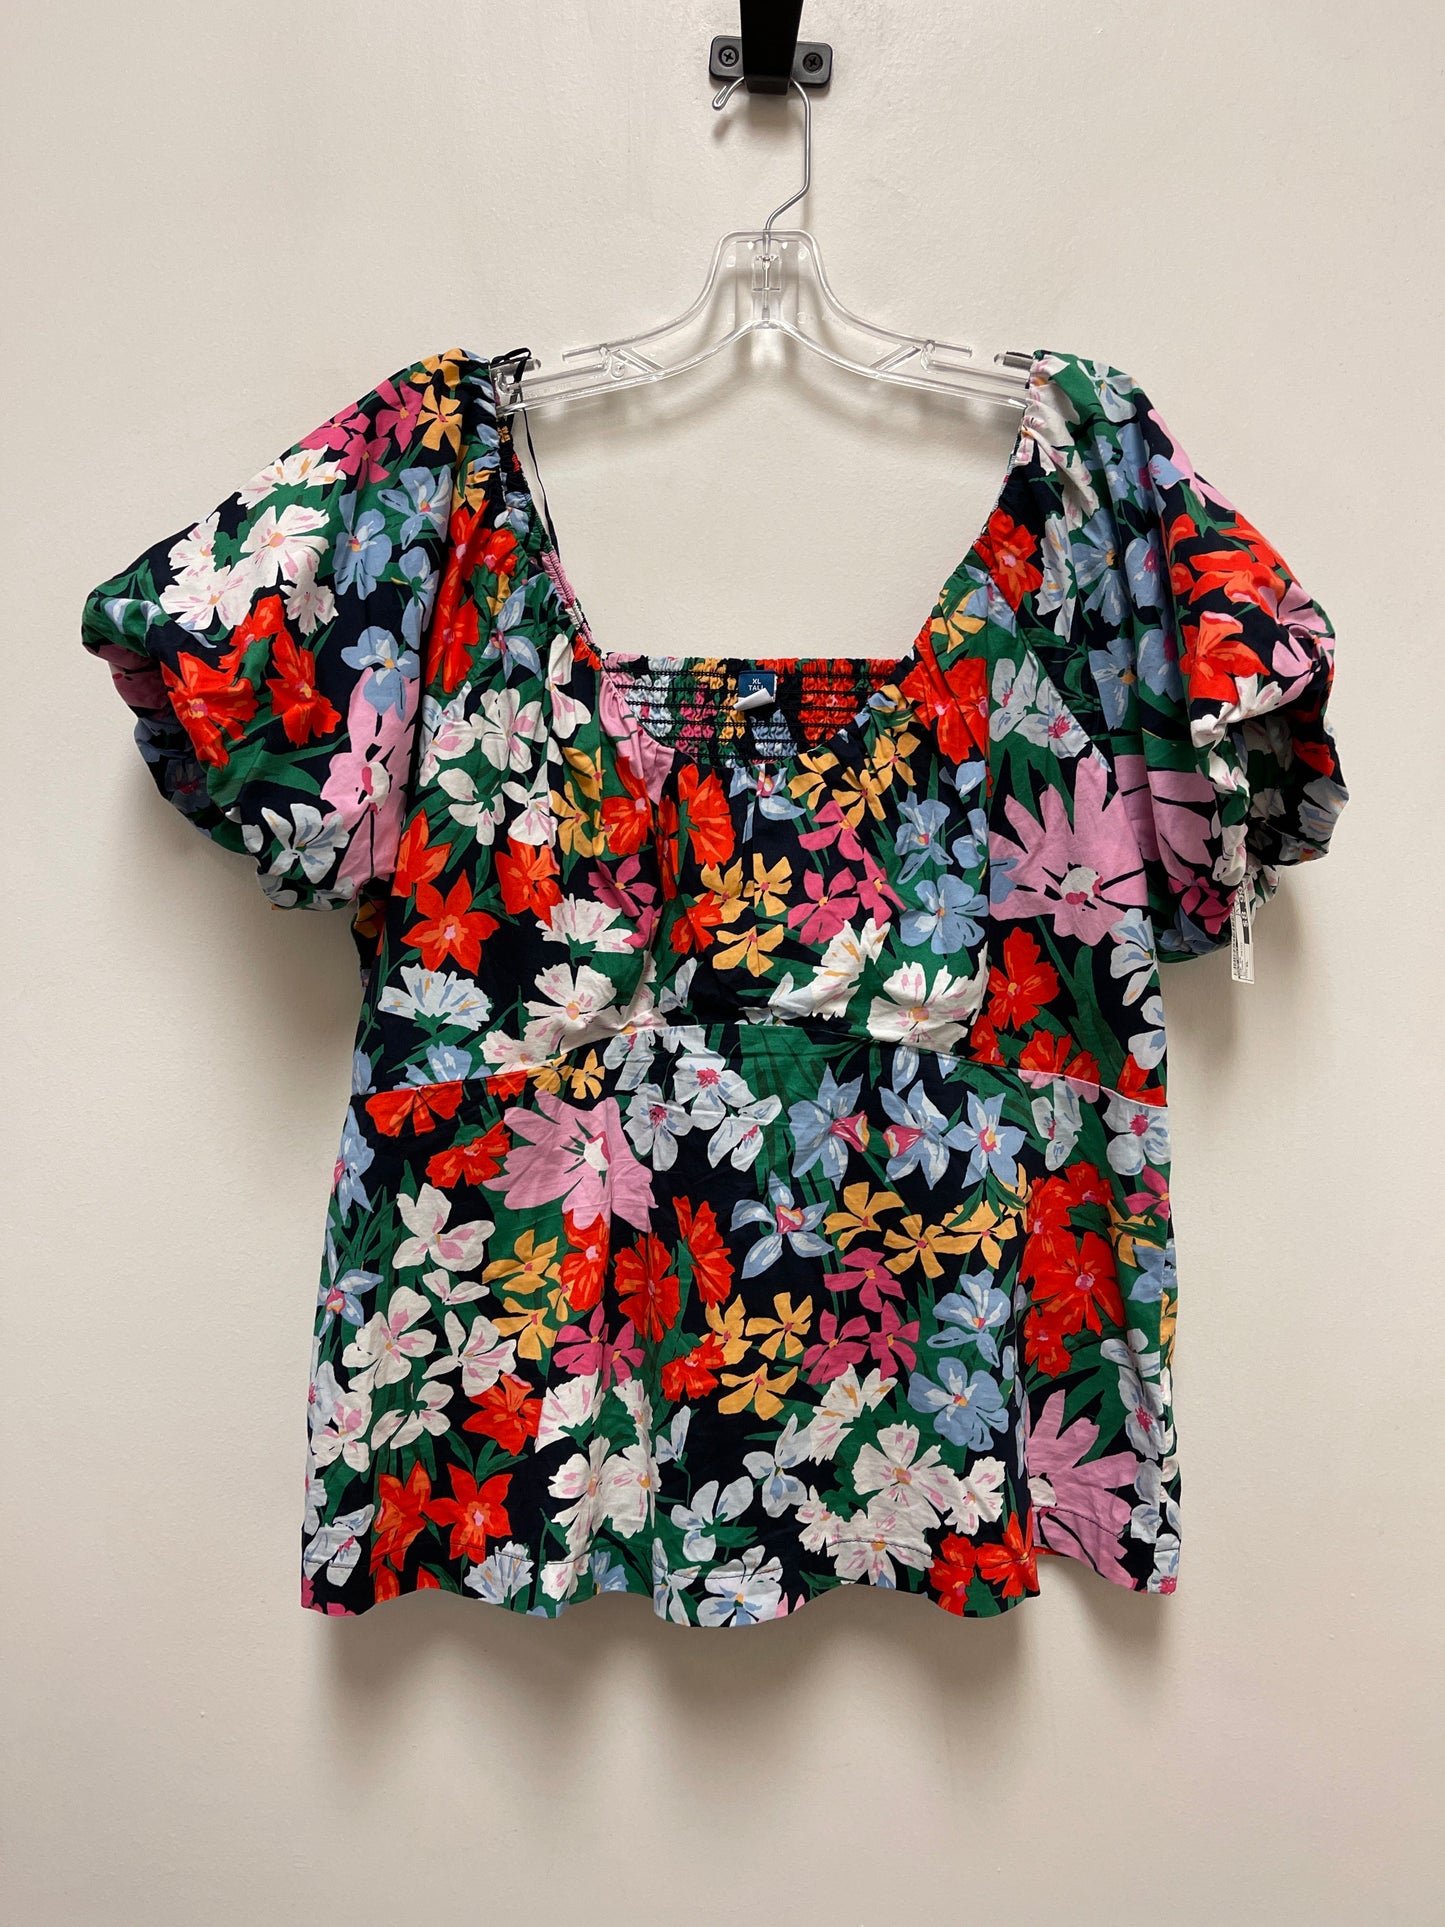 Floral Print Top Short Sleeve Old Navy, Size Xl